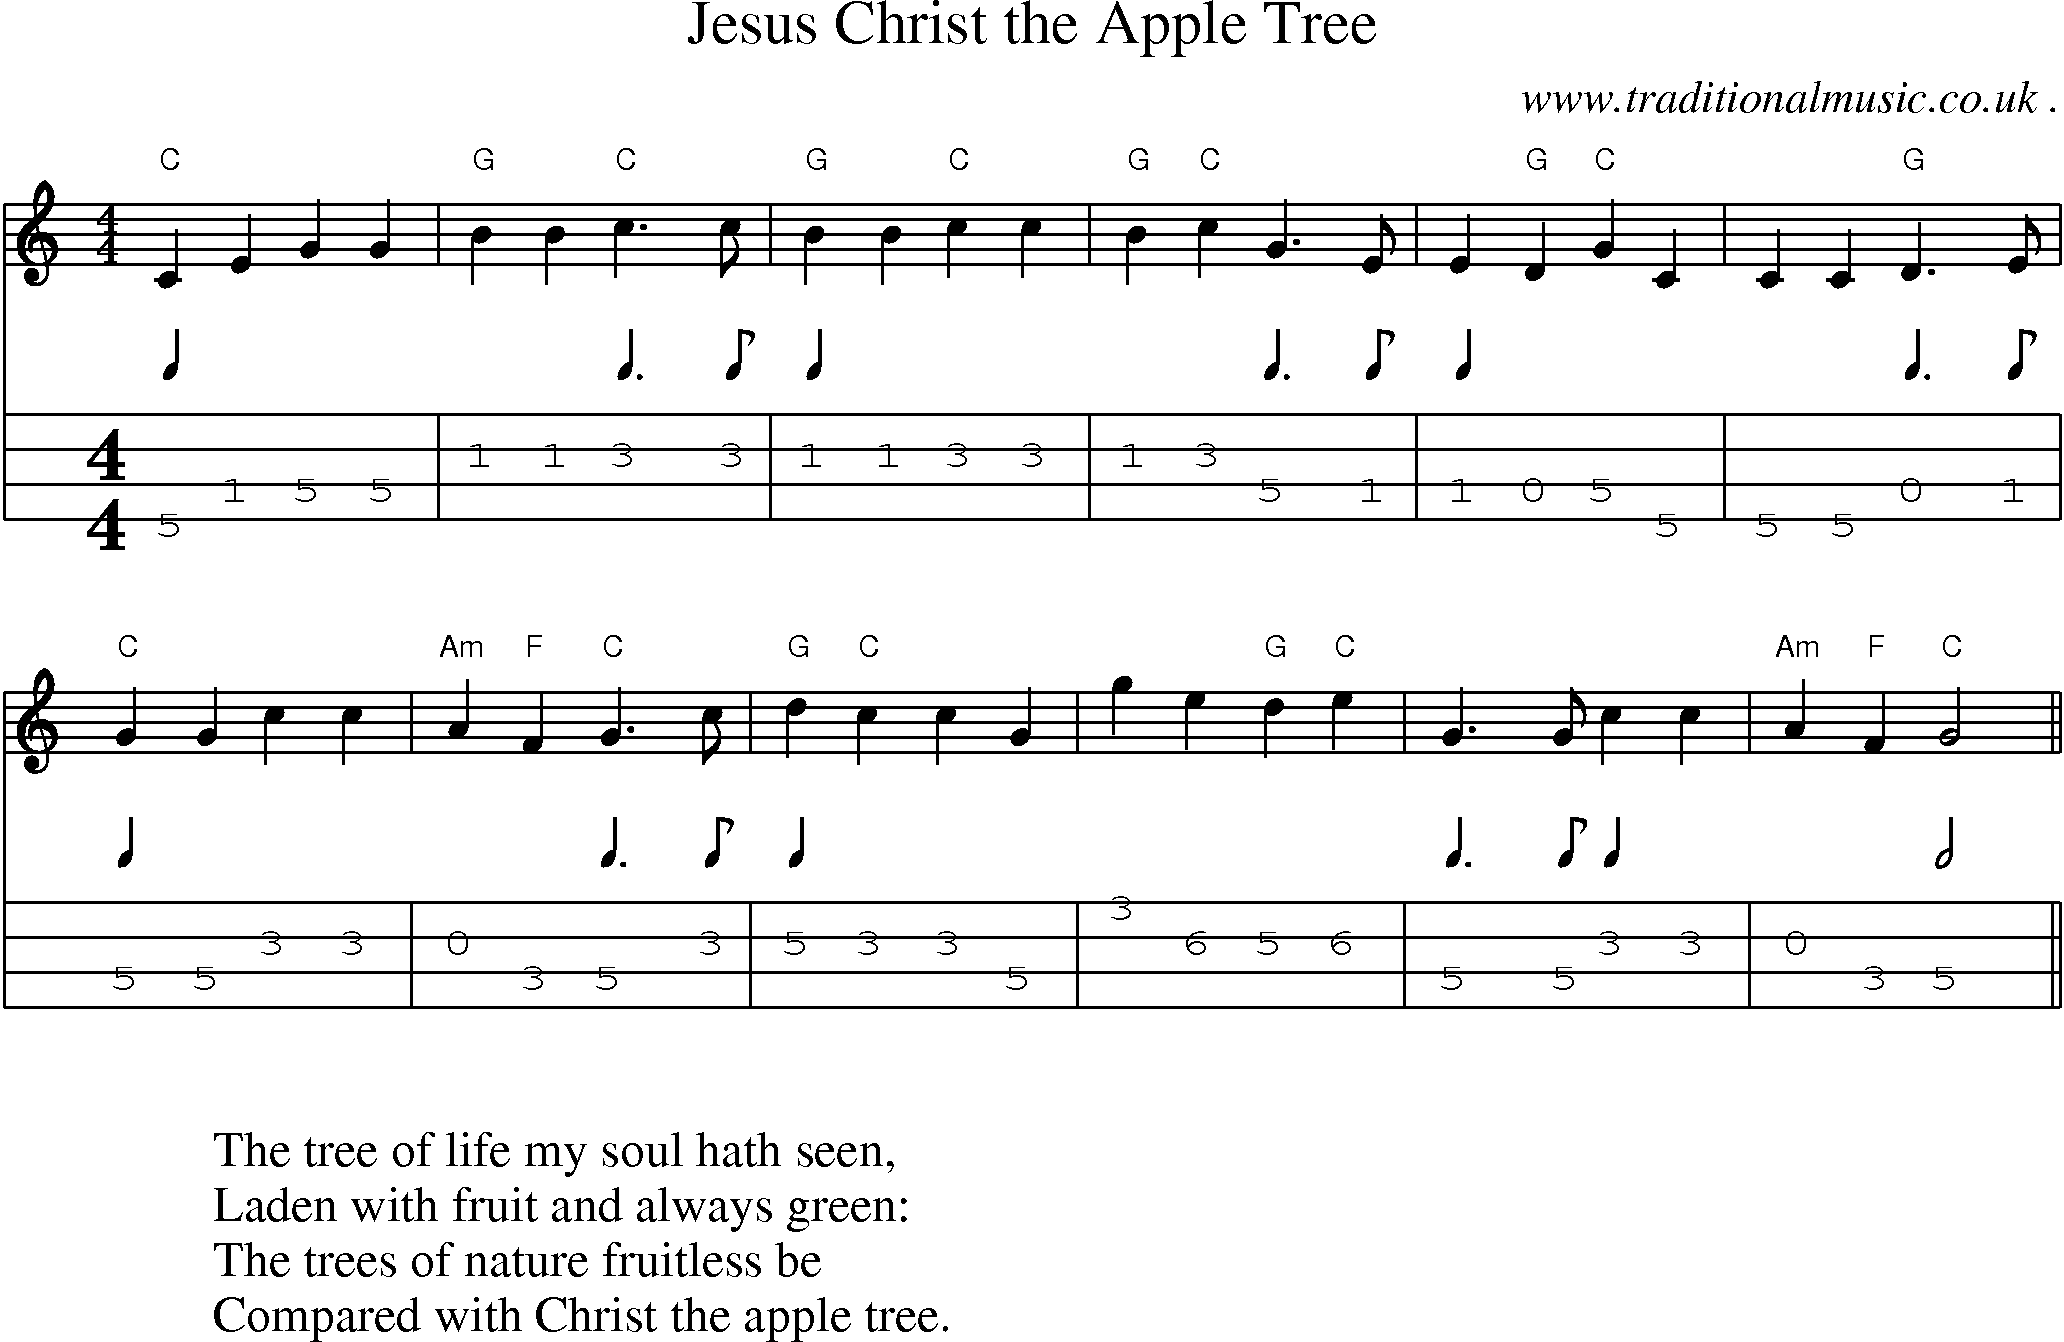 Music Score and Guitar Tabs for Jesus Christ the Apple Tree